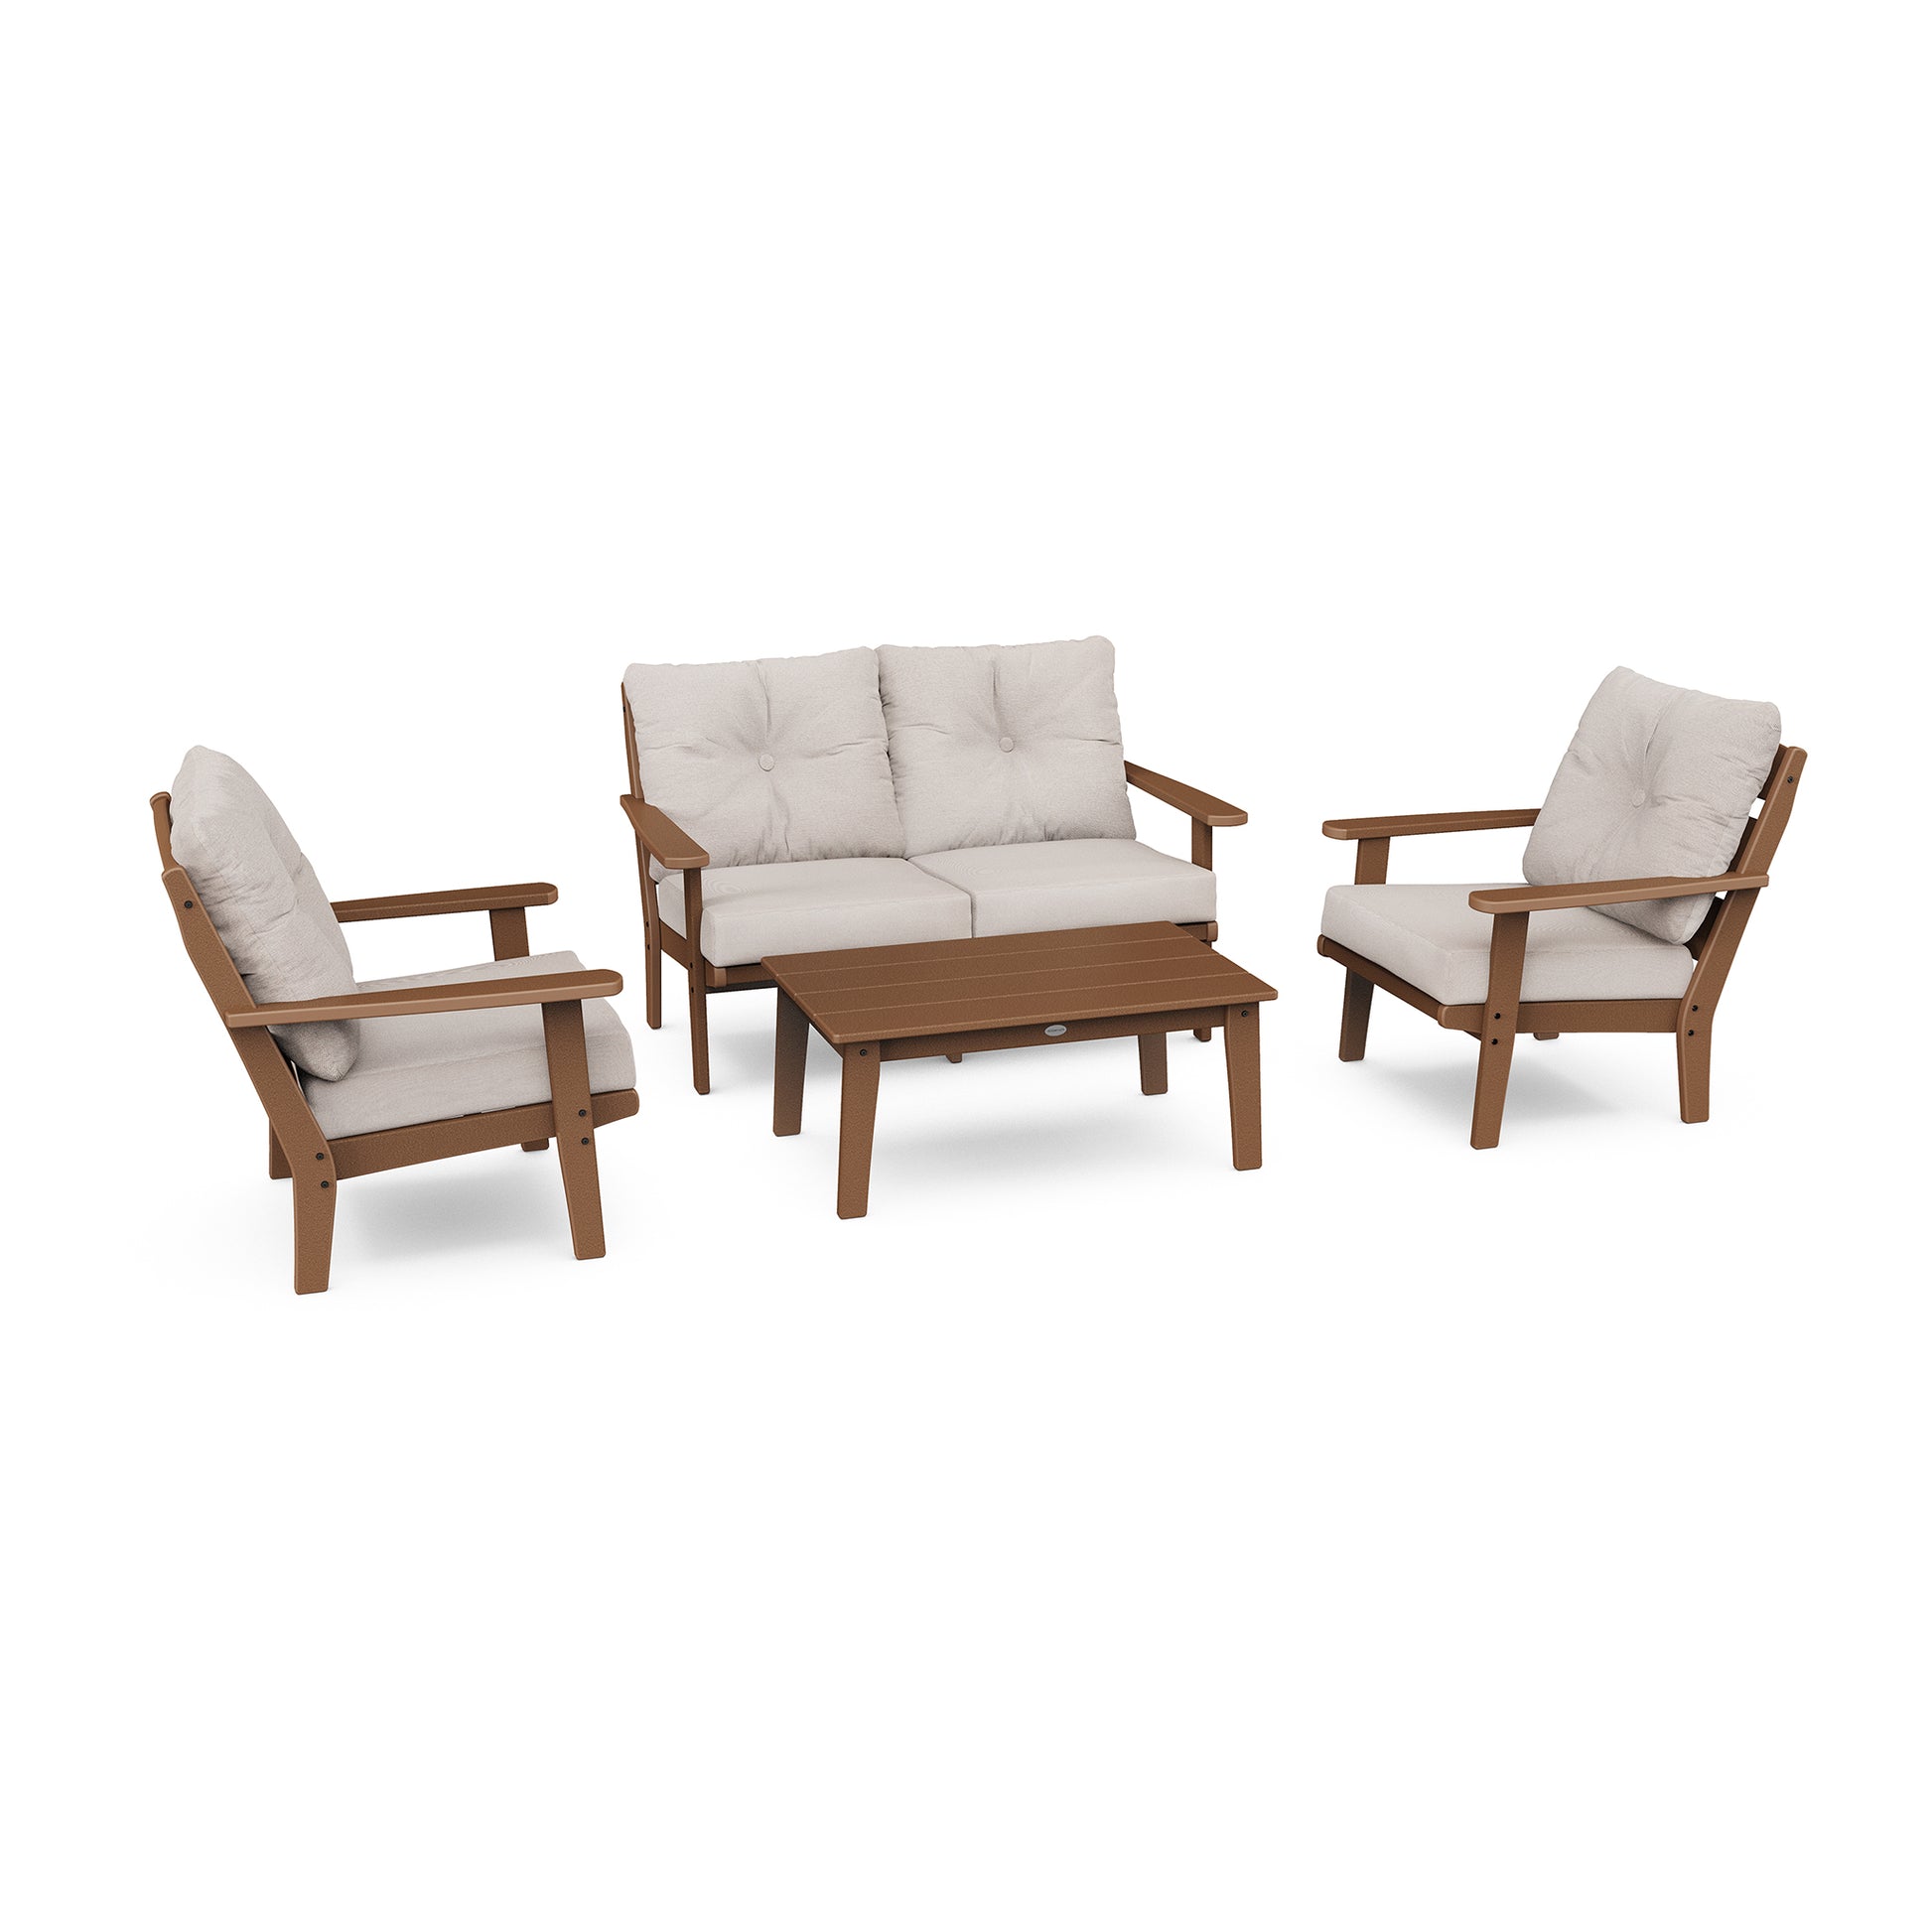 A POLYWOOD Lakeside 4-Piece Deep Seating Set with a POLYWOOD® lumber finish, featuring two single chairs, a double chair, and a rectangular coffee table, all accessorized with light.